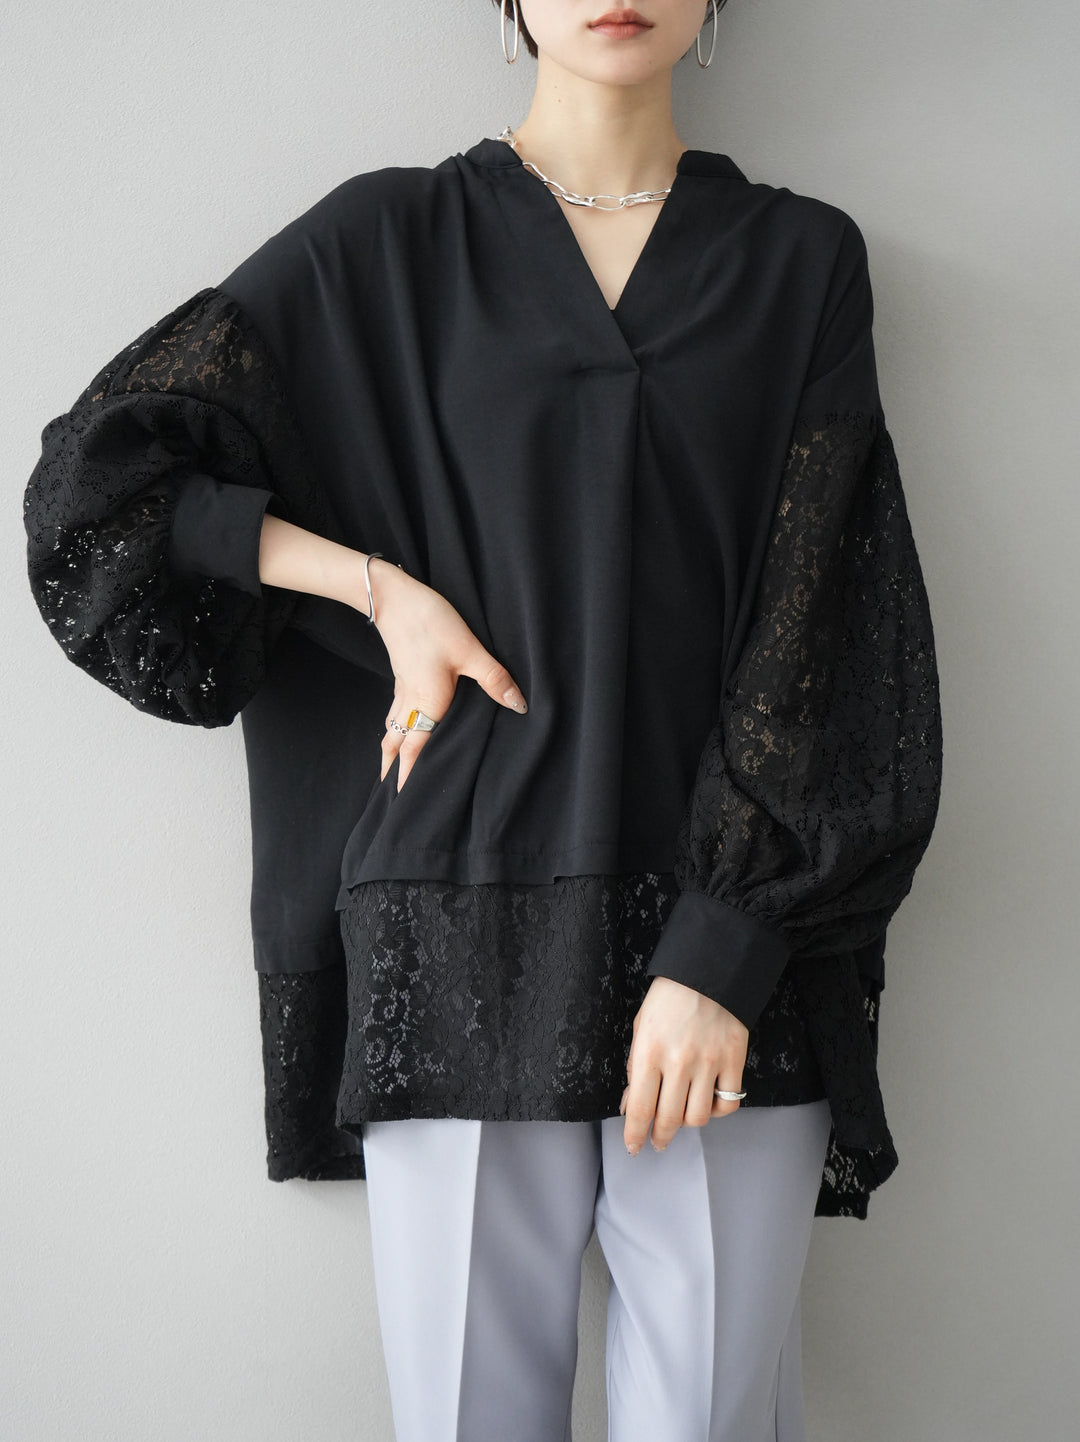 [SET] Lace-switched skipper blouse + lace-switched skipper blouse (2set)